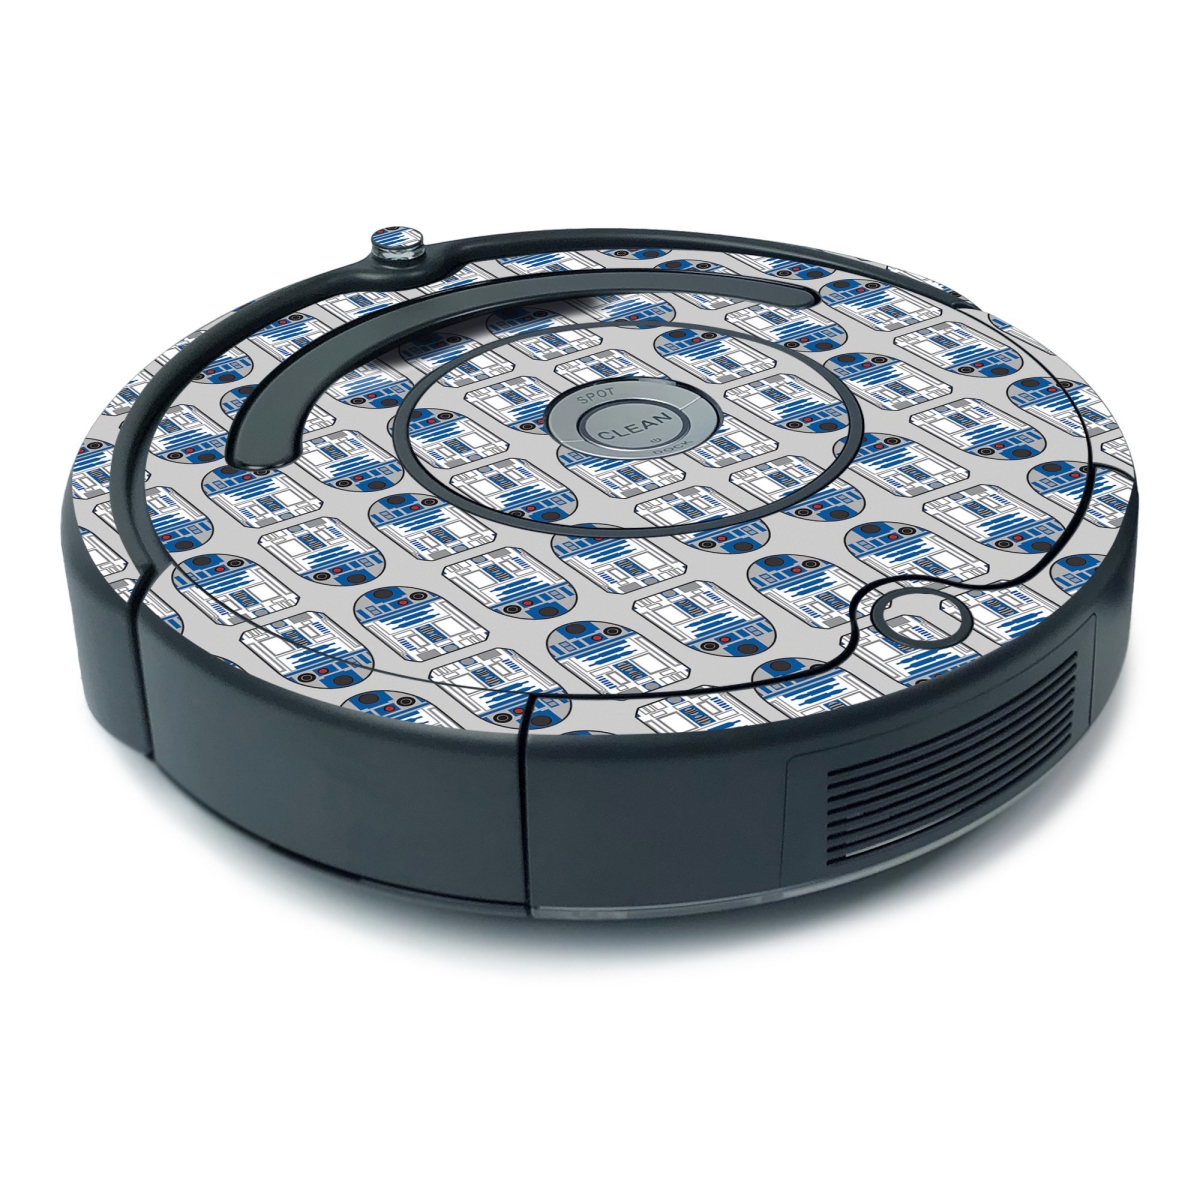 Picture of MightySkins IRRO675MIN-Galaxy Bots Skin for iRobot Roomba 675 Minimal Coverage - Galaxy Bots